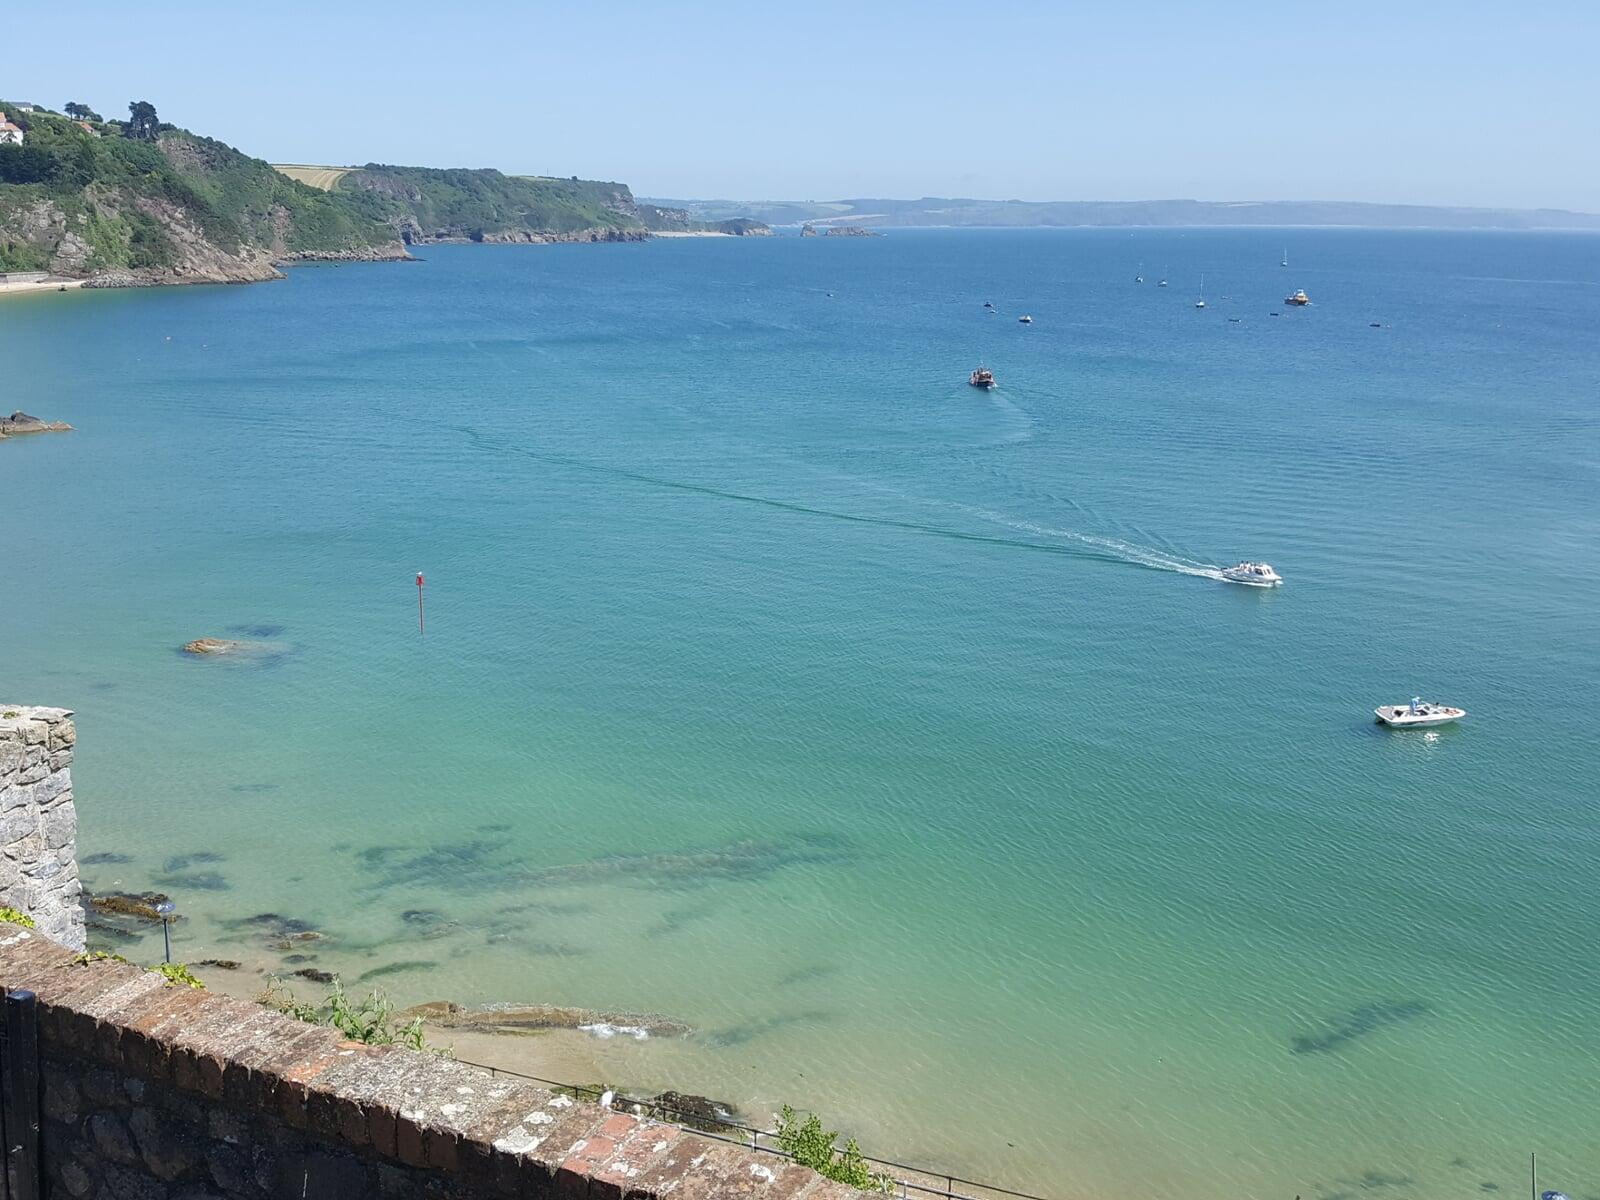 Swim the famous IronMan Wales route at Tenby